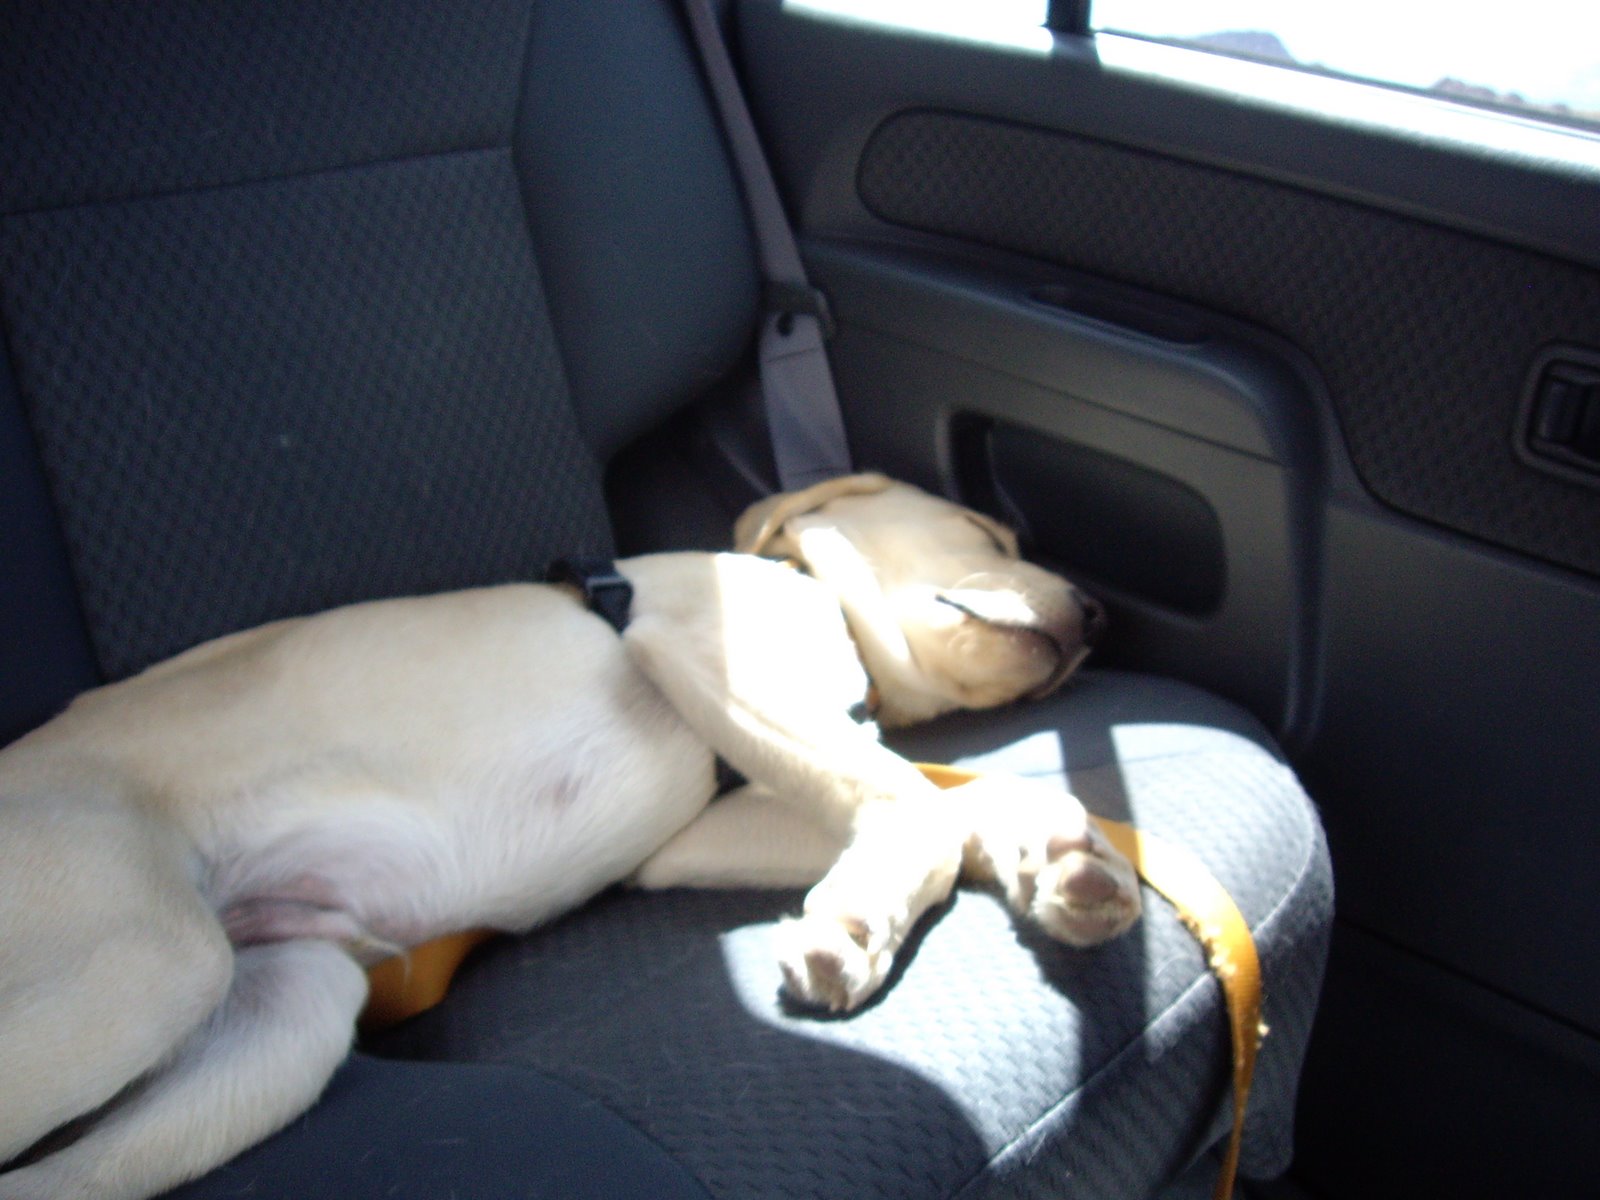 This is my dog passed out on our back seat after we wear him out!